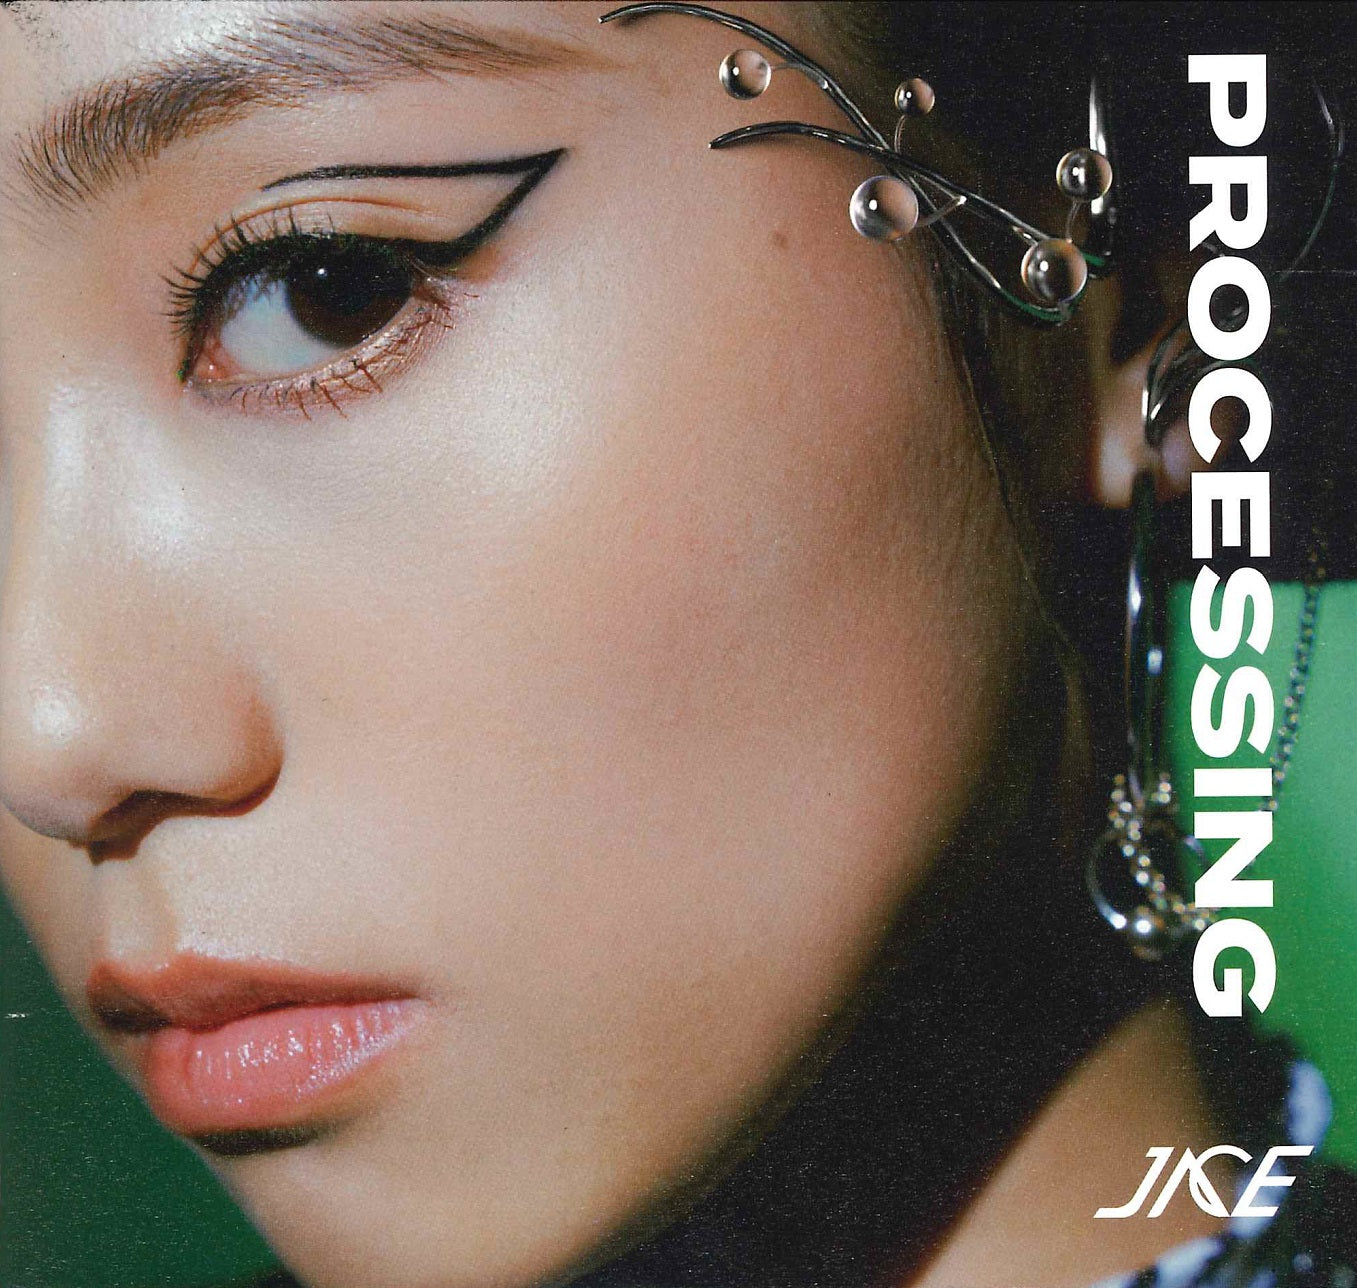 Processing (Deluxe with sunglass) (2CD) 預購版-陳凱詠 Jace Chan